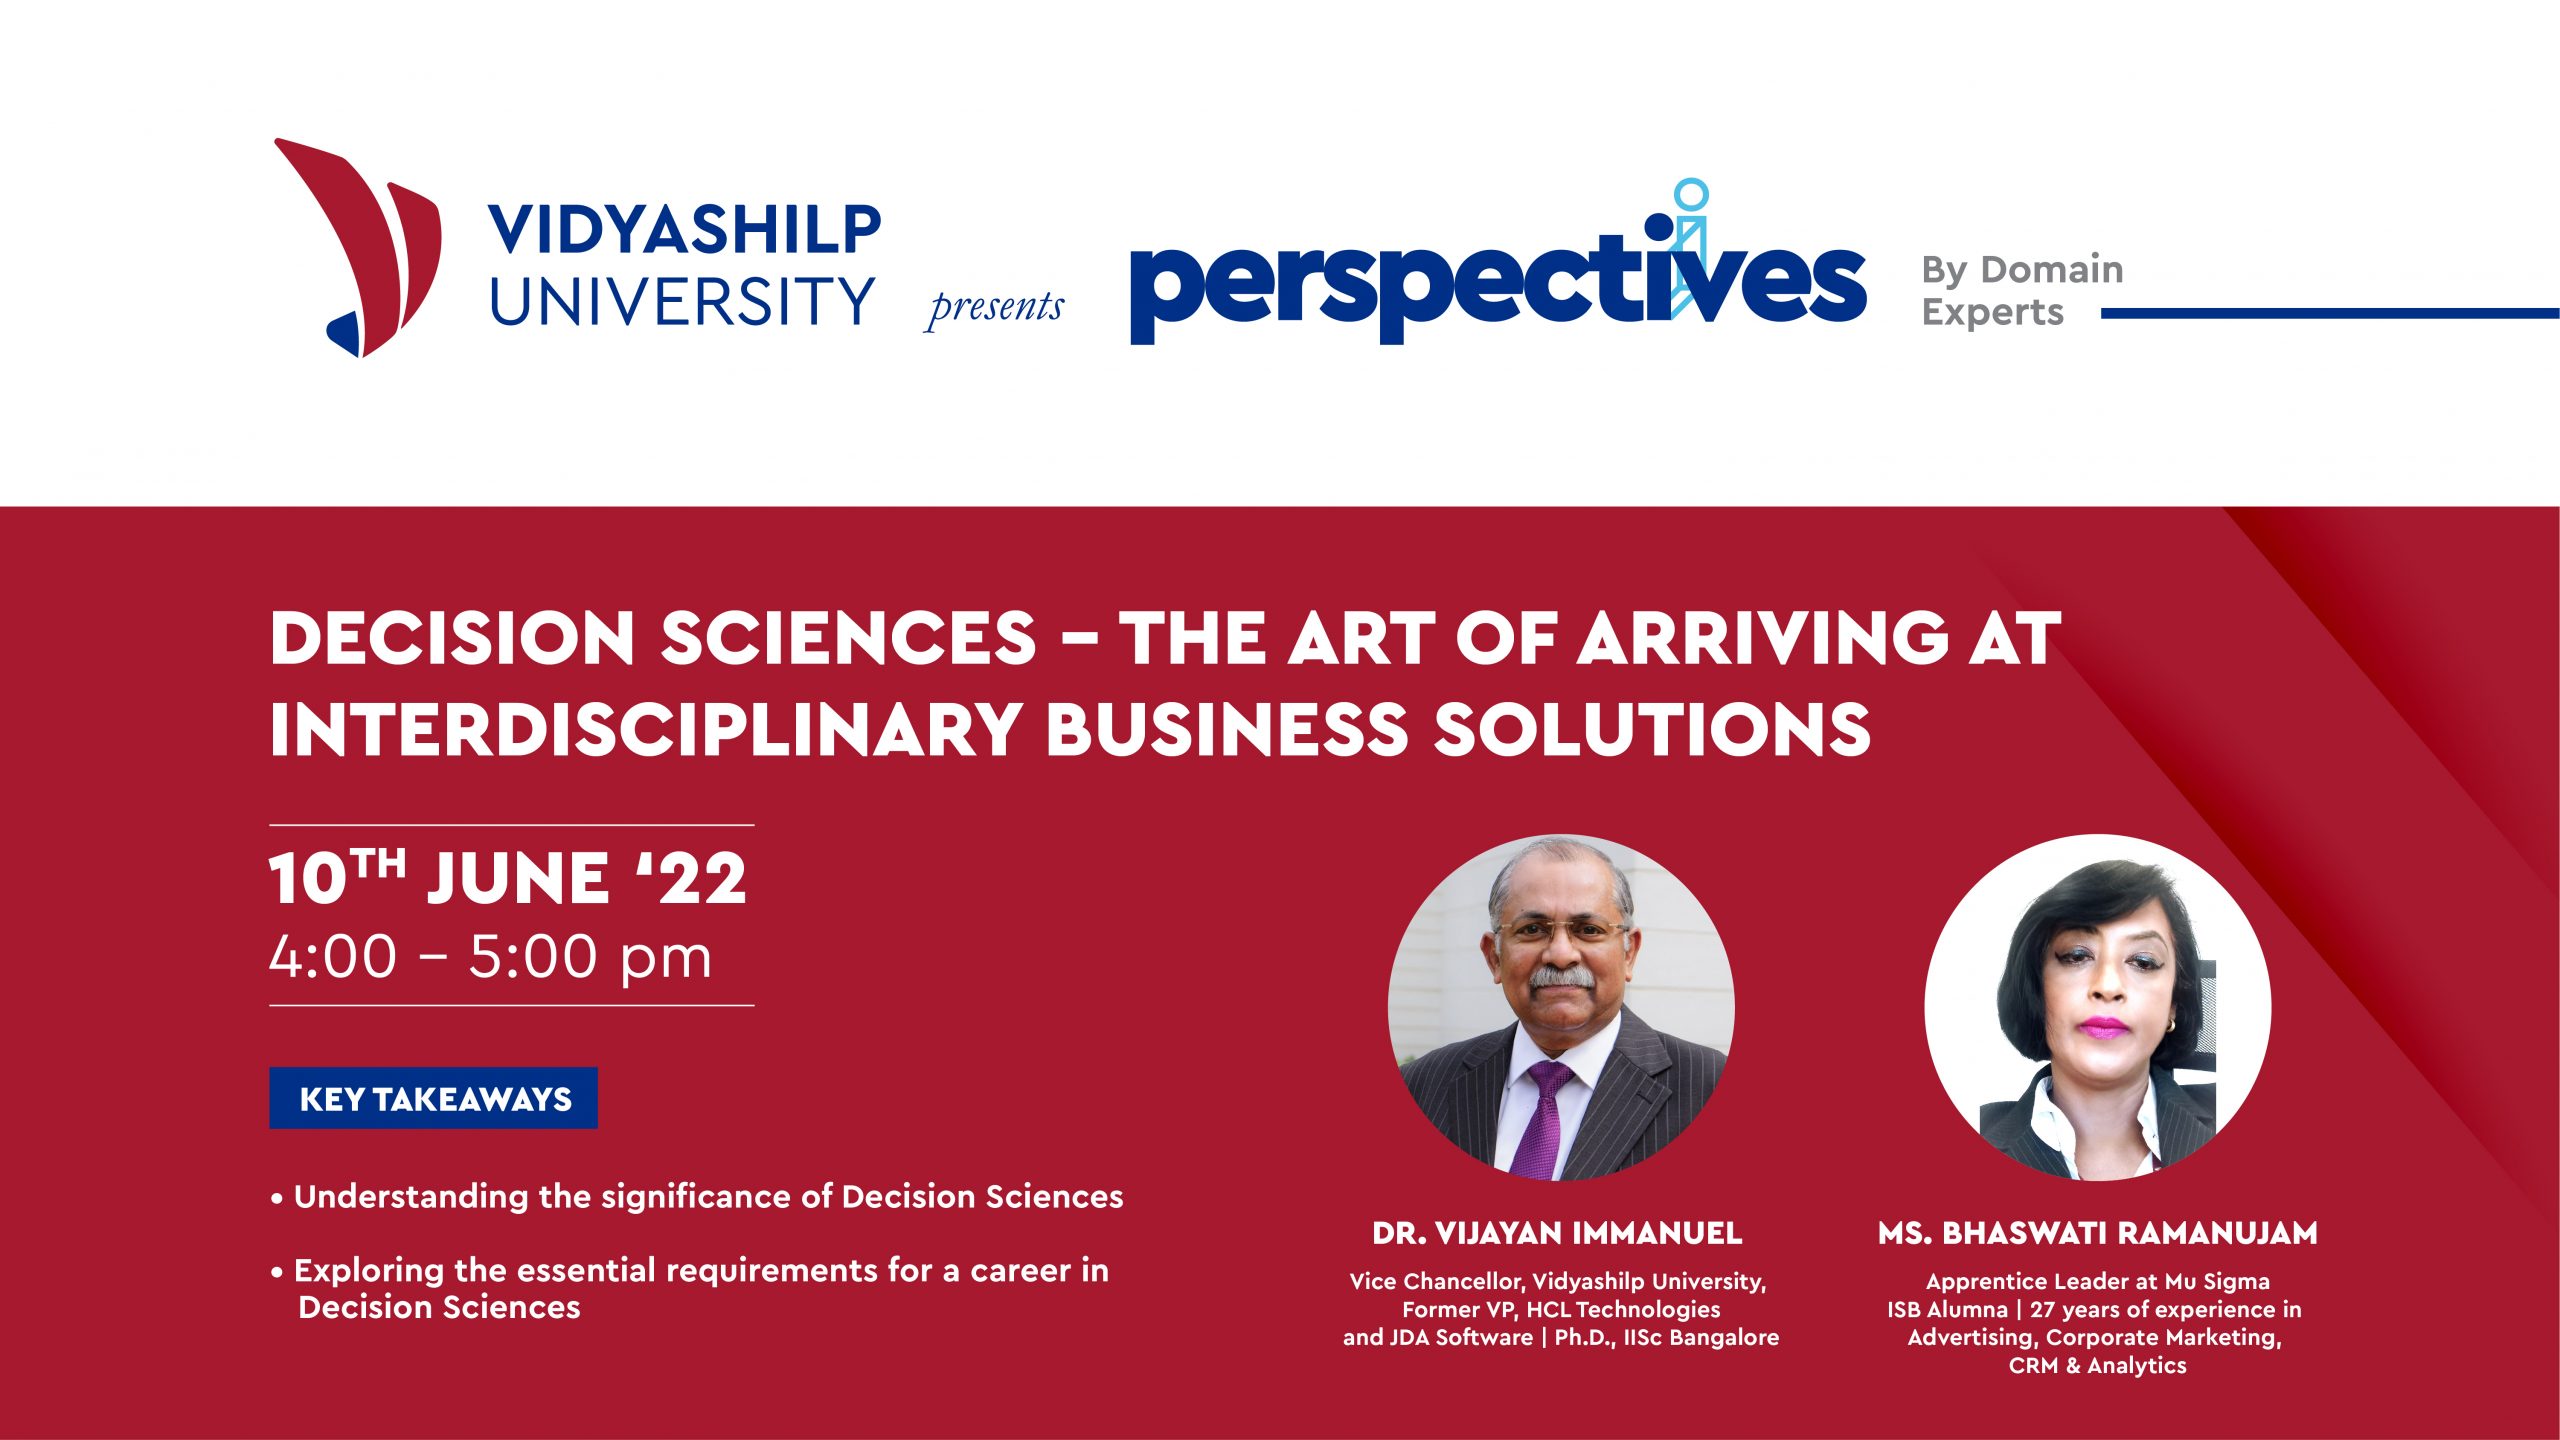 Decision Sciences - The art of arriving at interdisciplinary business solutions : Vidyashilp University